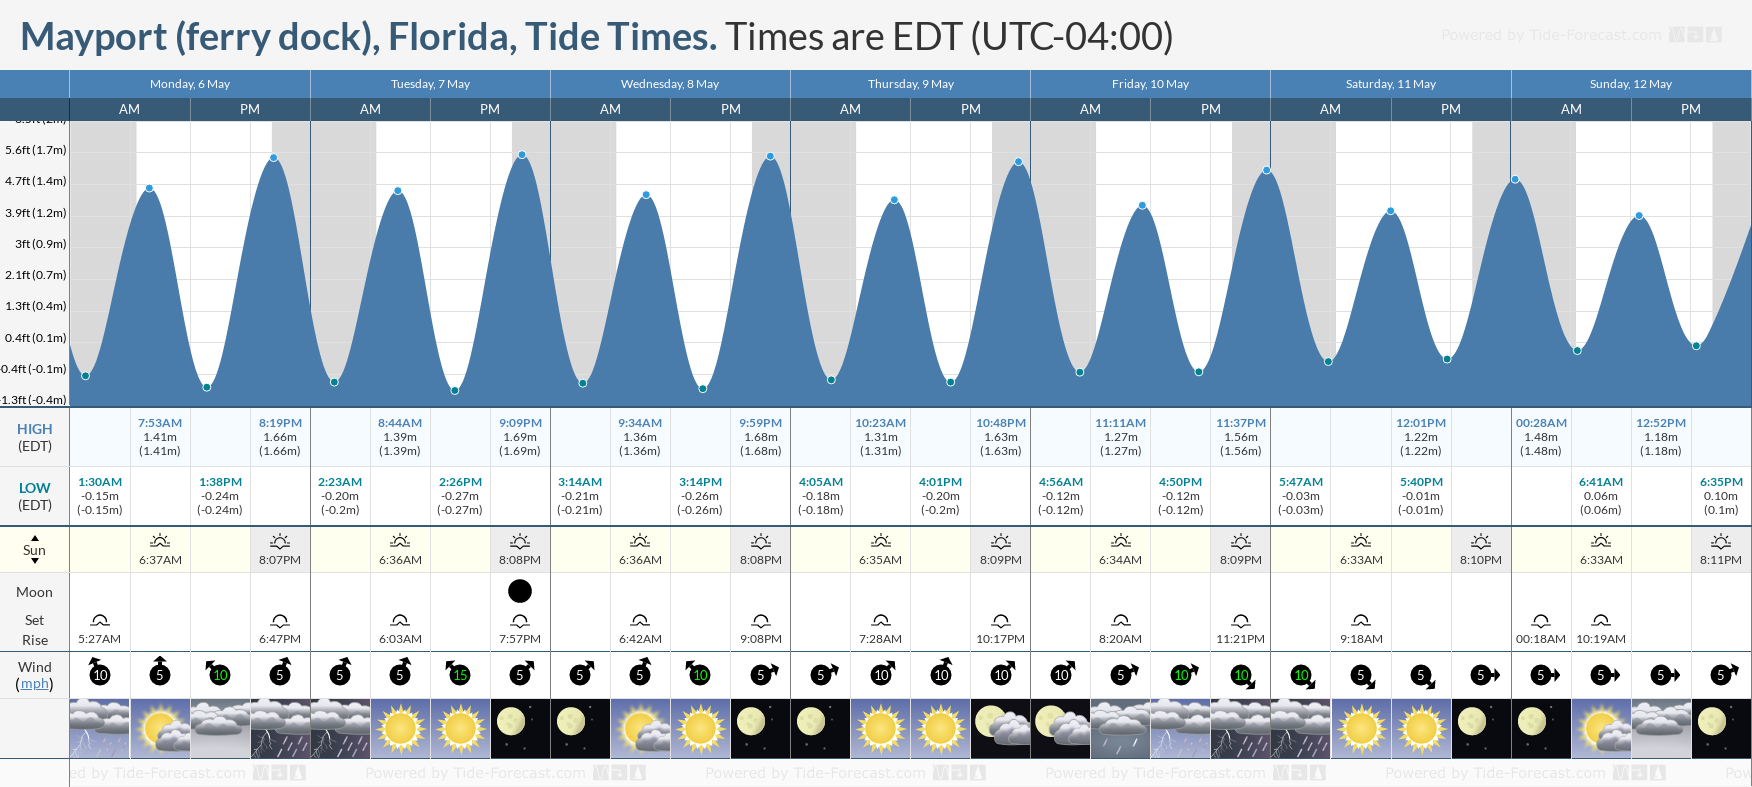 Mayport (ferry dock), Florida Tide Chart including high and low tide tide times for the next 7 days